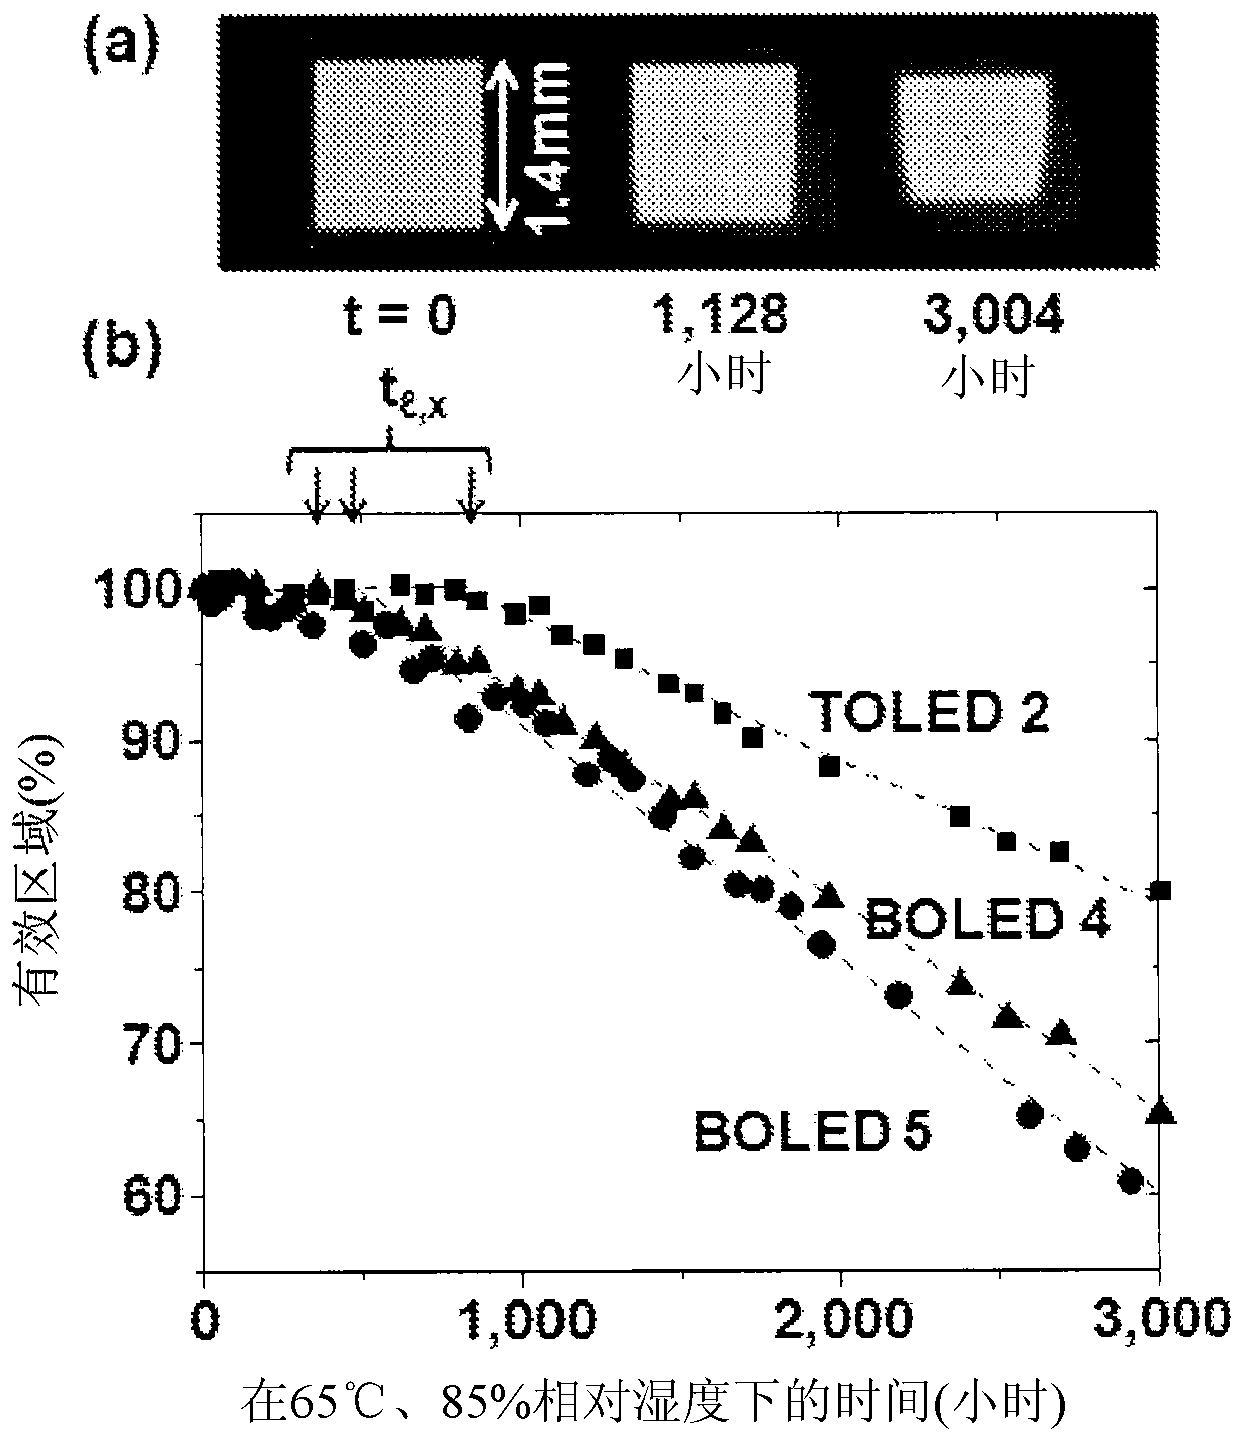 Permeation barrier for encapsulation of devices and substrates